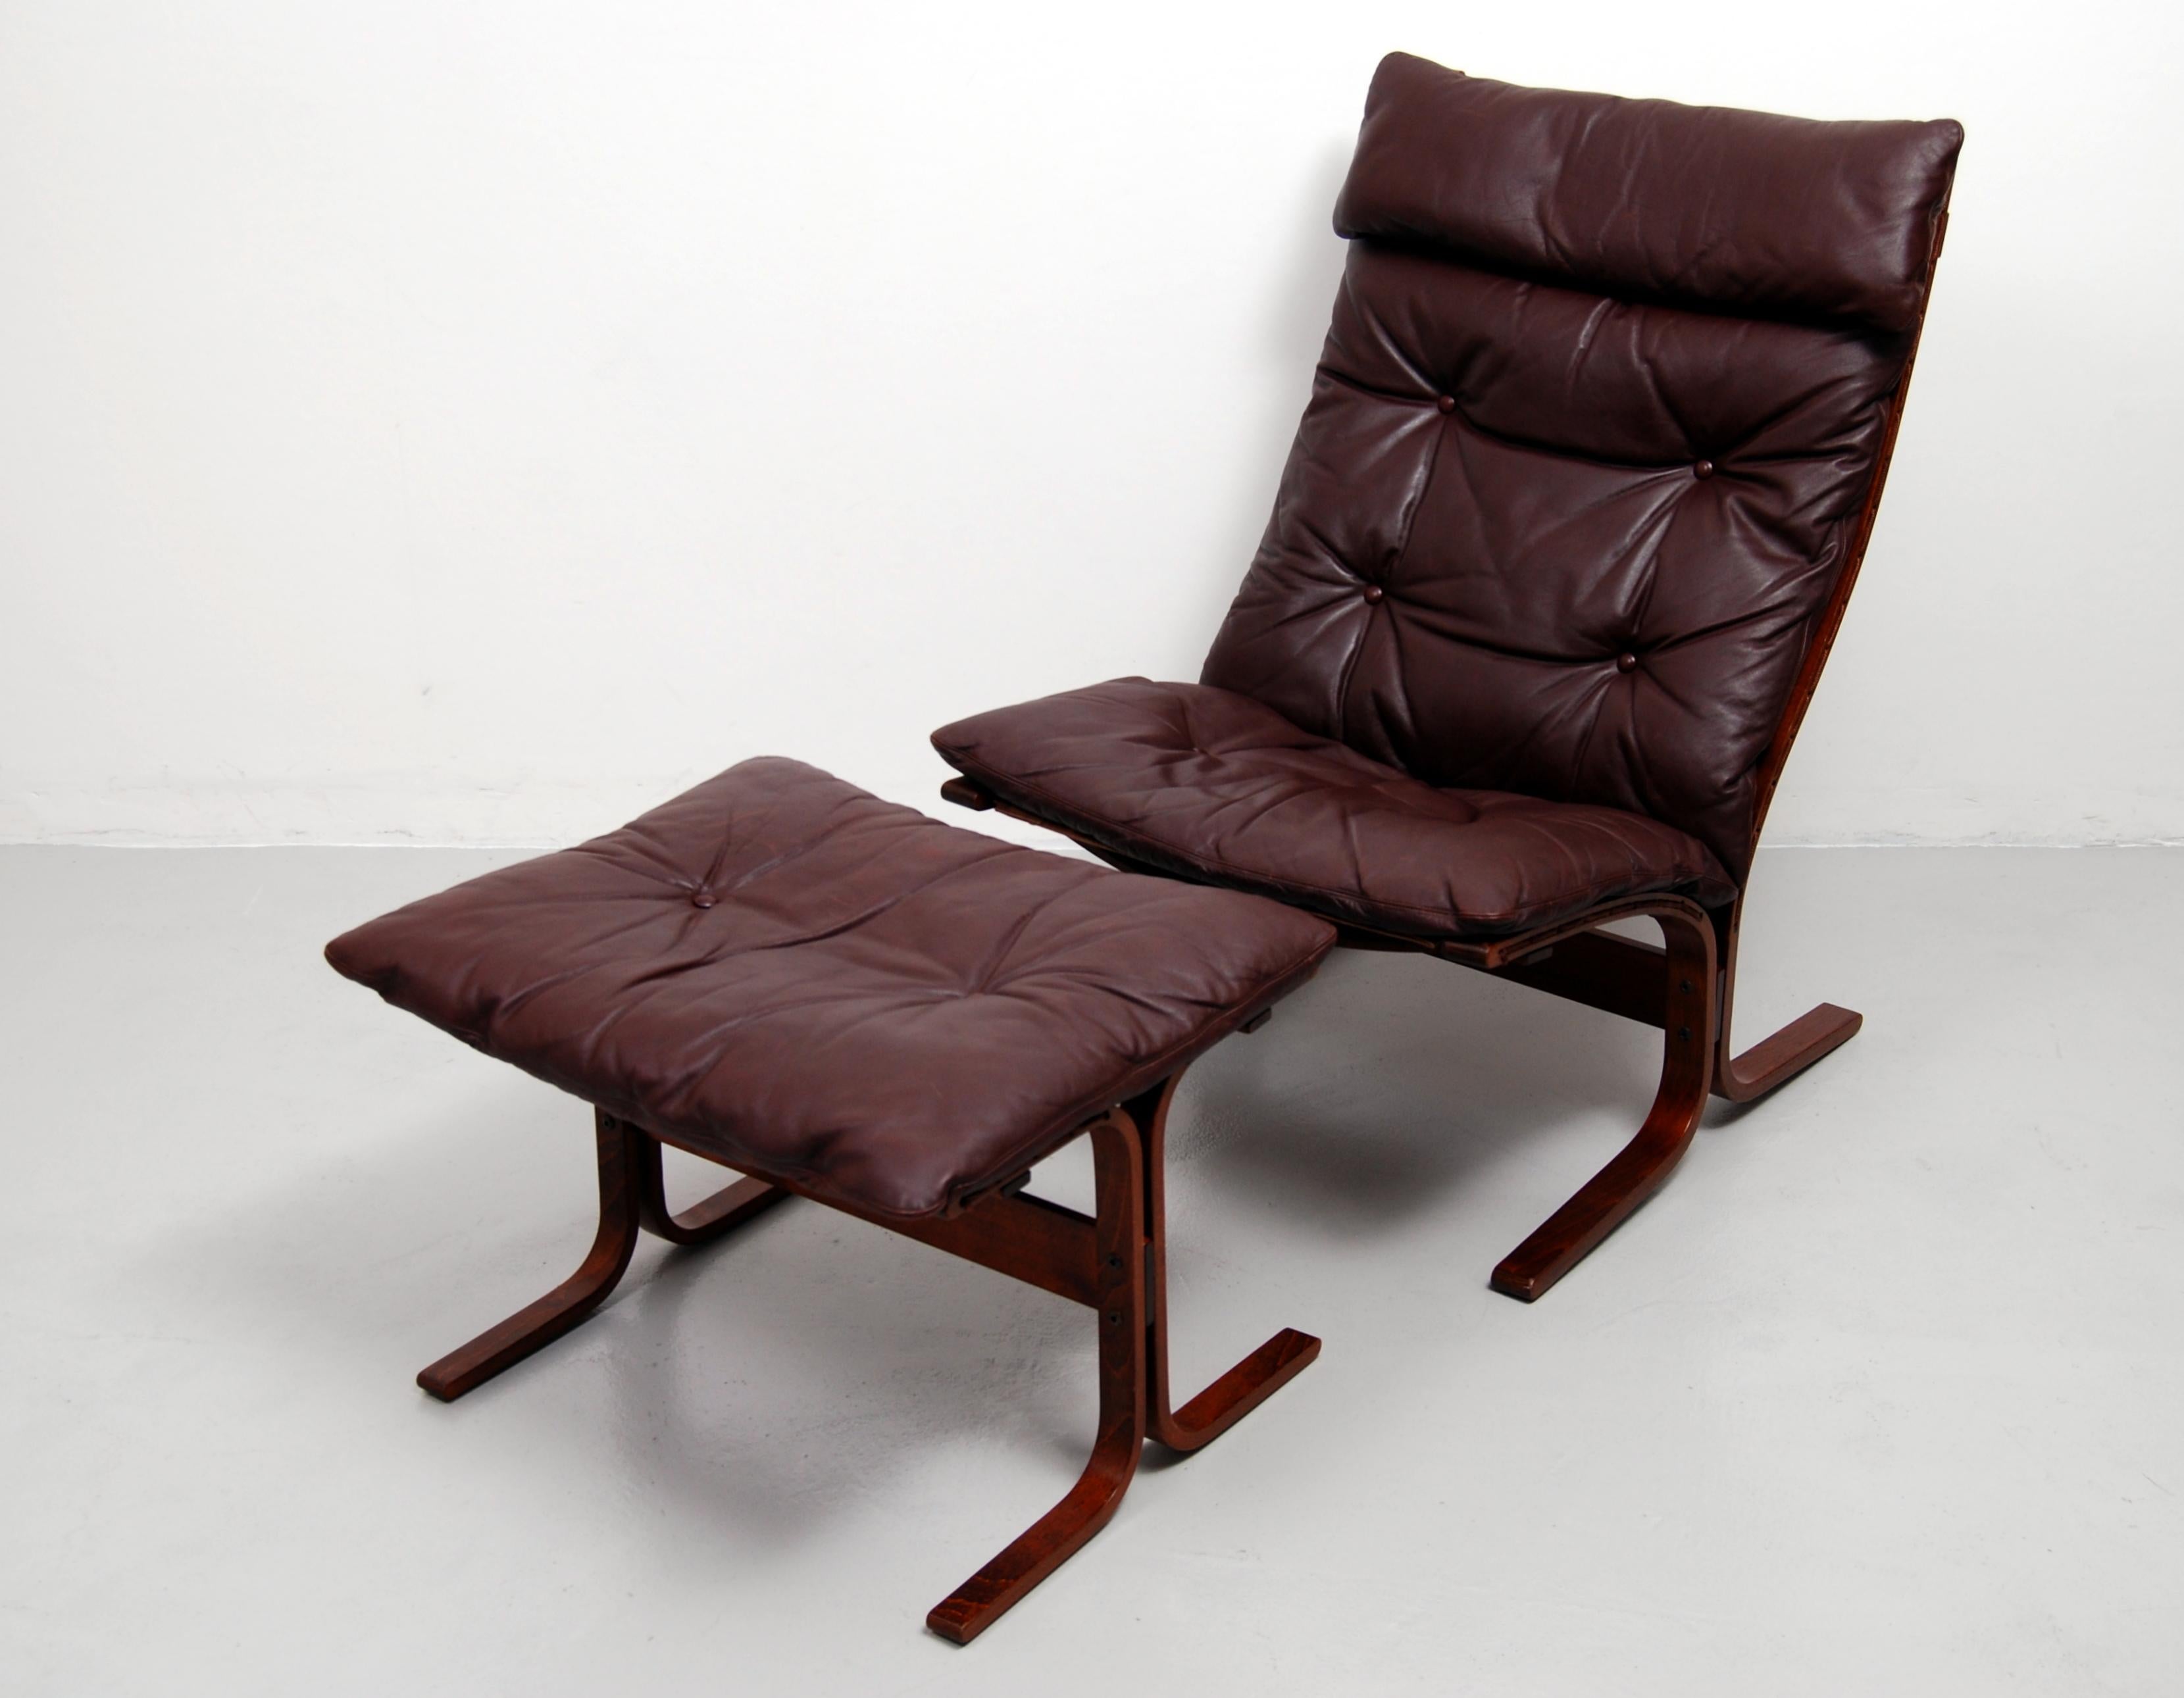 Siesta high back lounge chair and matching ottoman designed by Ingmar Relling and made in Norway by Westnofa. This award winning chair and ottoman has a bentwood frame with a leather cushion that sits on a canvas sling. Labelled with Westnofa